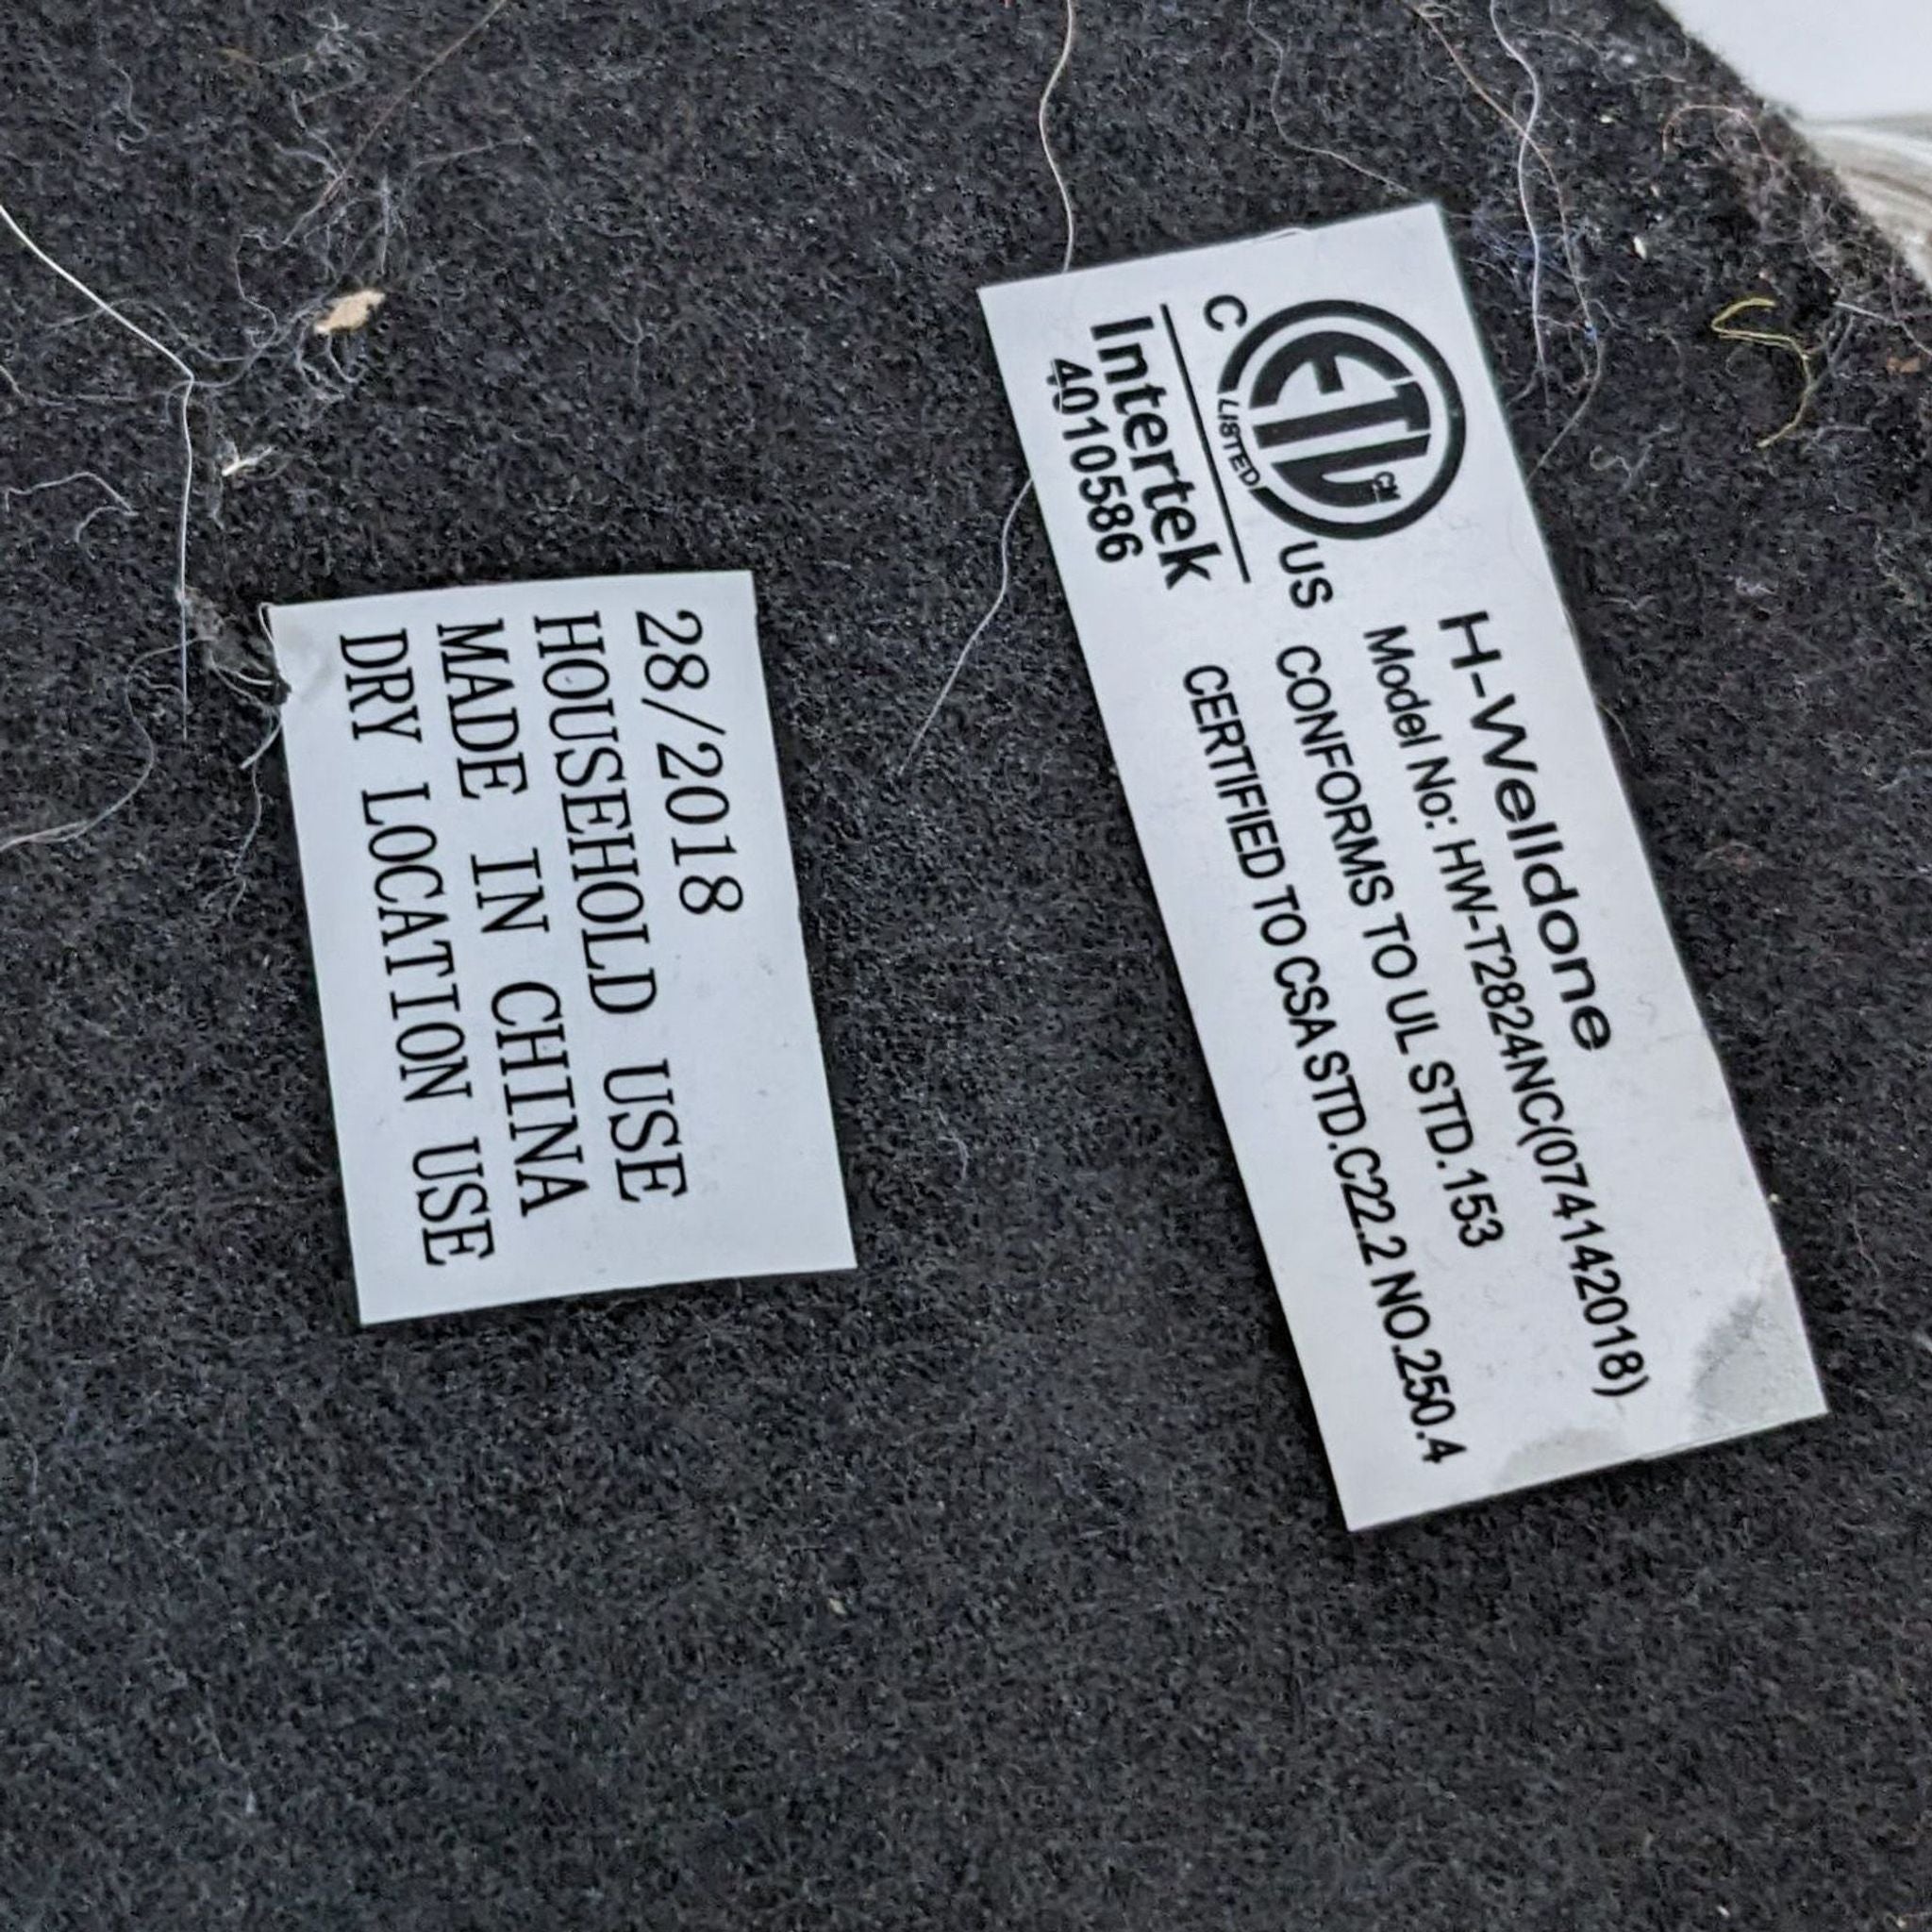 Two labels on a fabric surface with text indicating product certification and specifications for a Reperch lighting product, made for household use and dry locations.